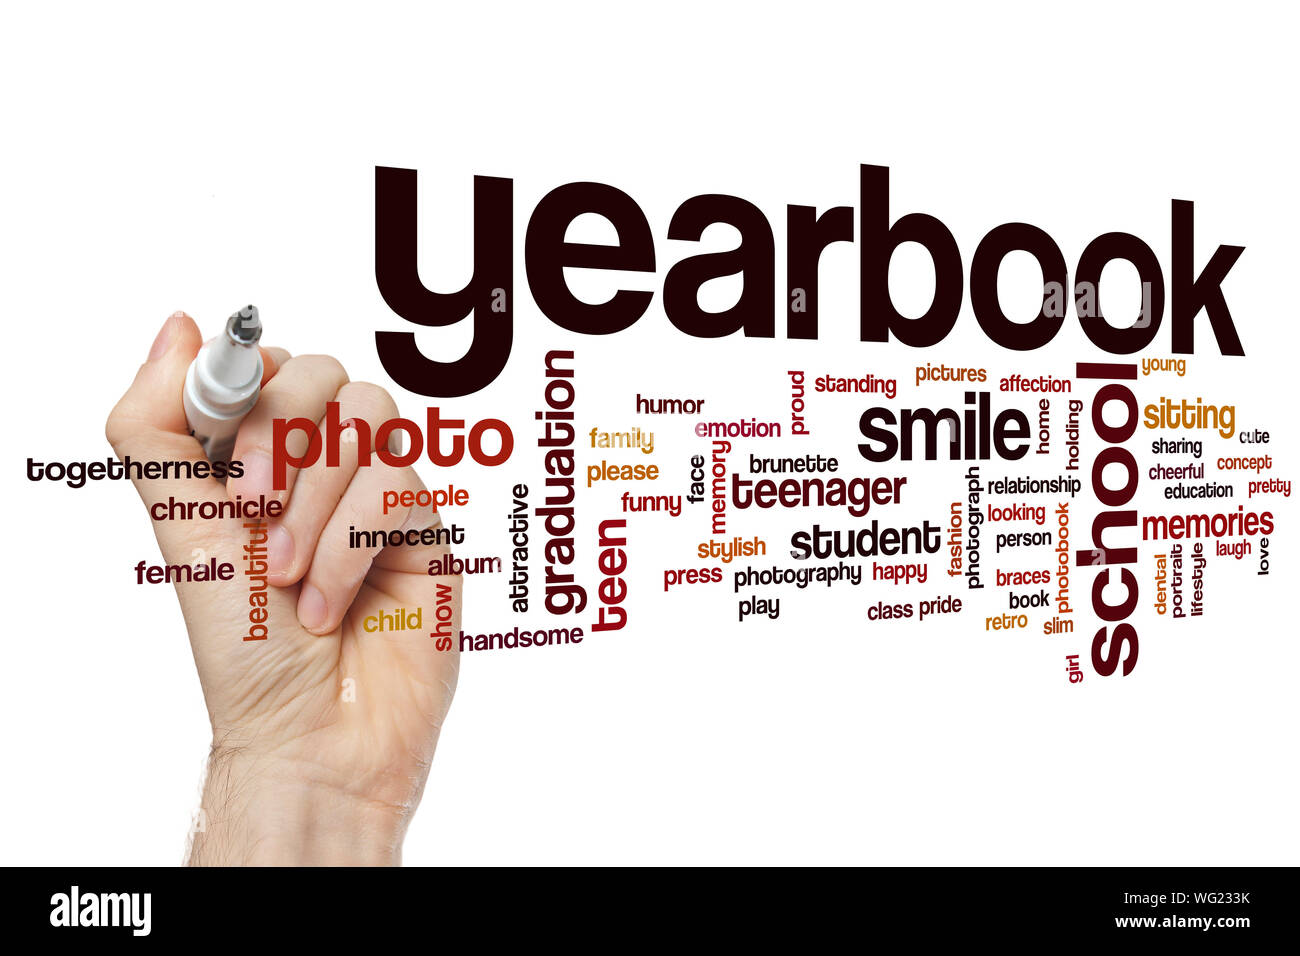 Year book words